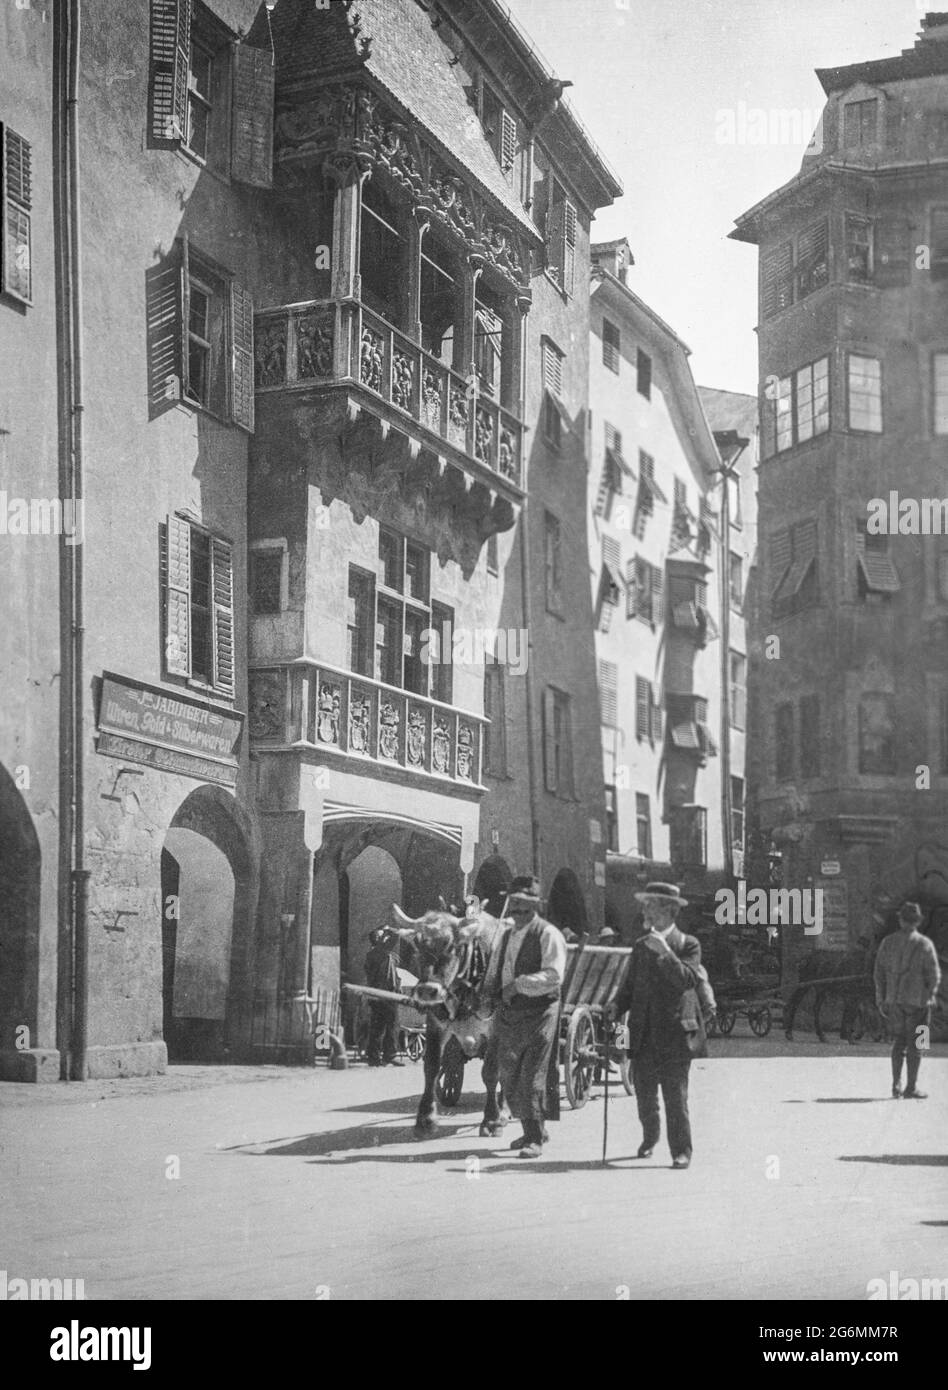 An early 20th century black and white vintage photograph taken in the old town of Innsbruck, Austria, showing the famous Golden Roof, or Goldenes Dachl. On the street a man has a cart pulled by a cow or bull. Stock Photo